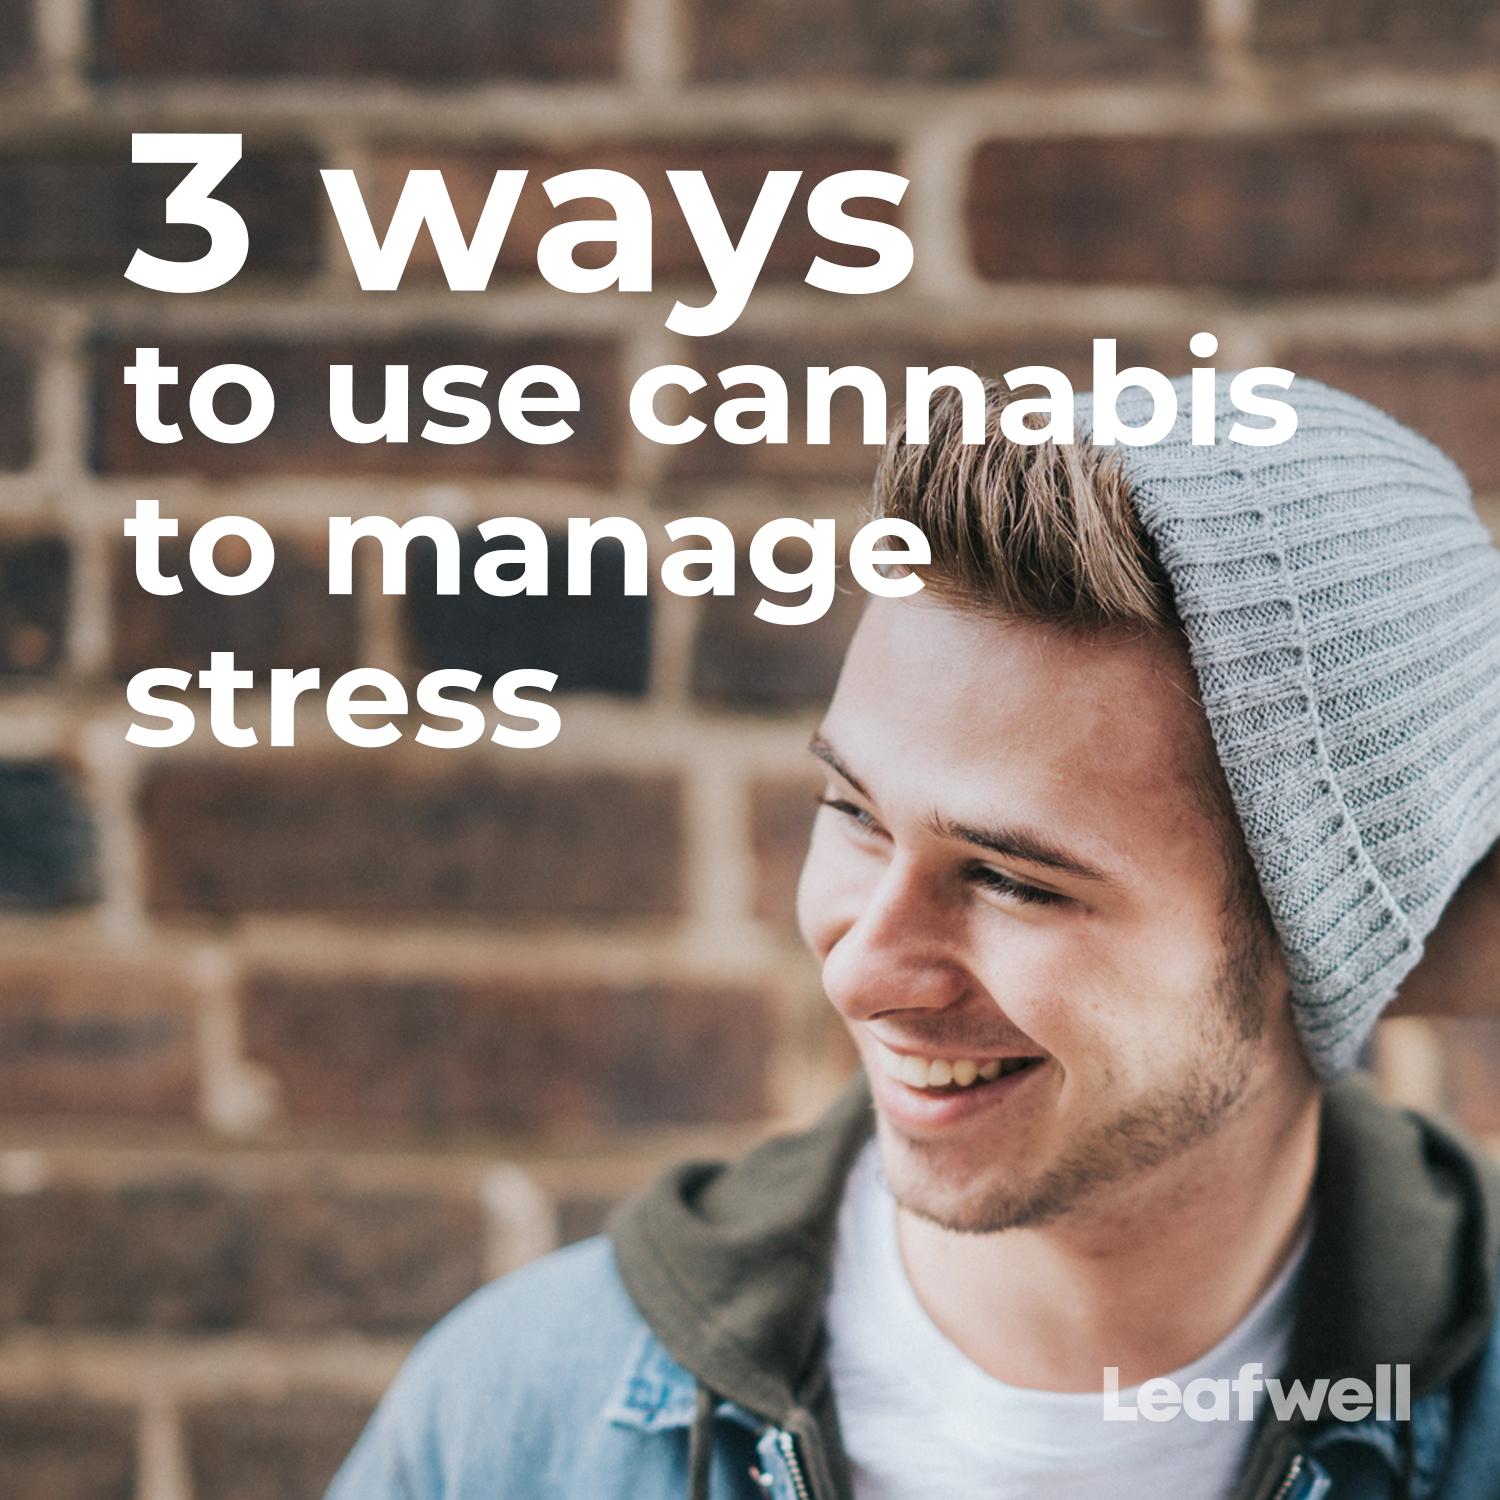 3 Ways to Use Cannabis to Manage Stress